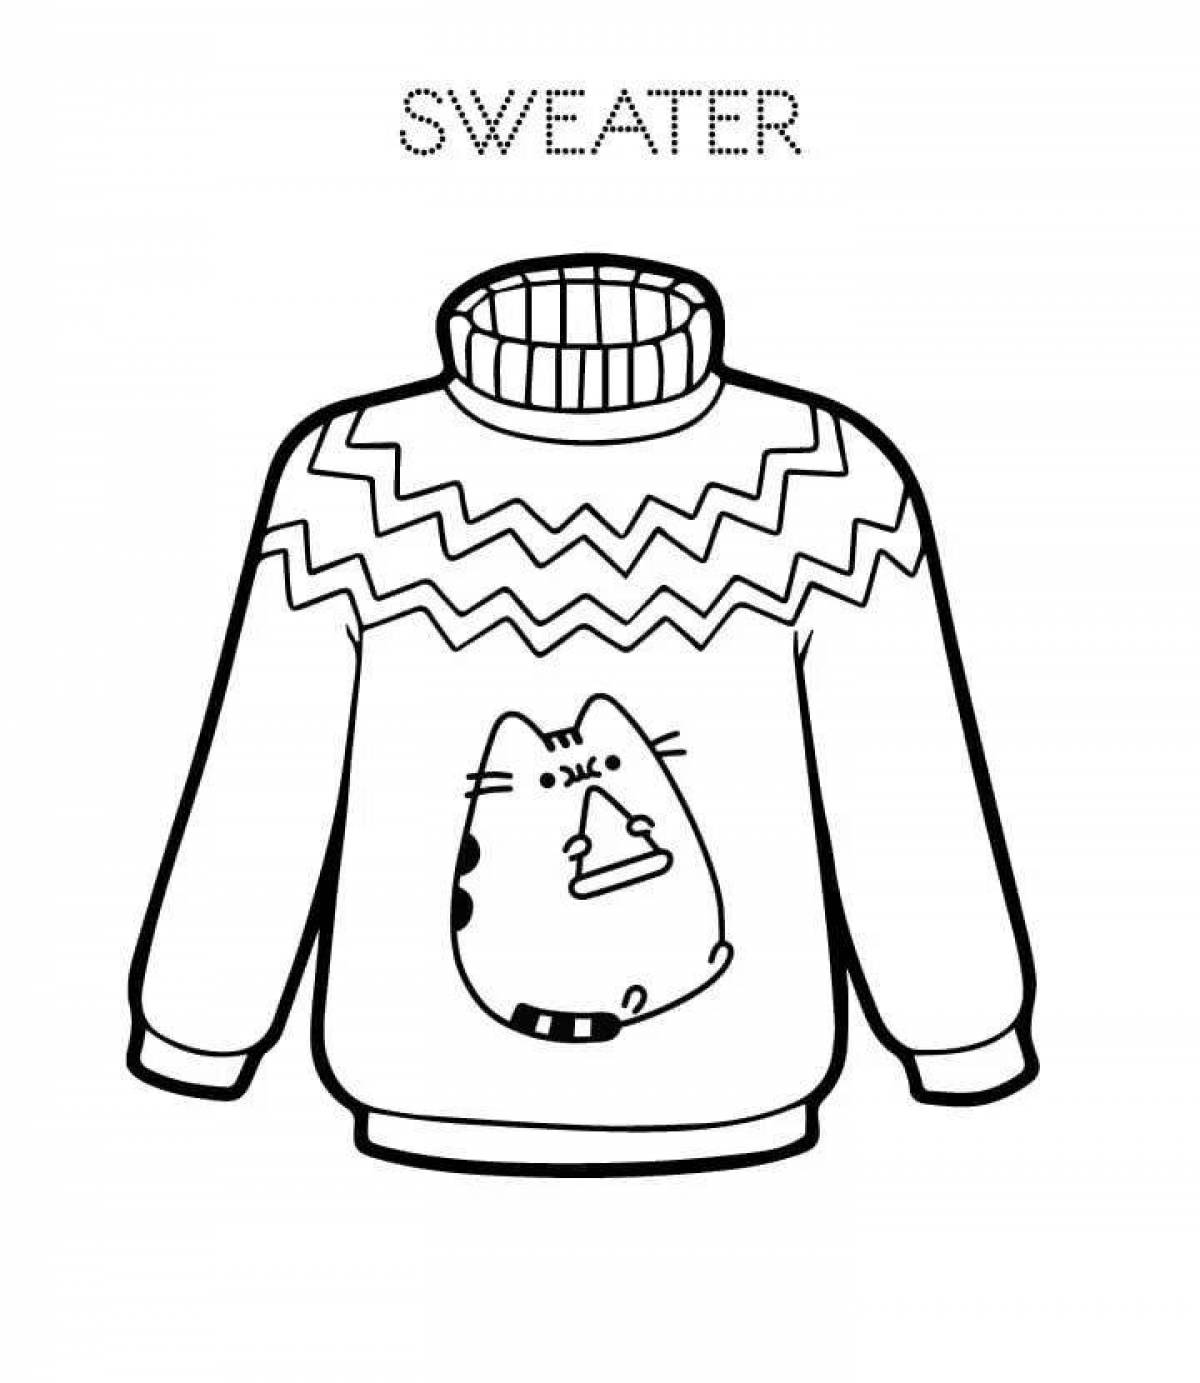 Adorable sweater coloring for kids